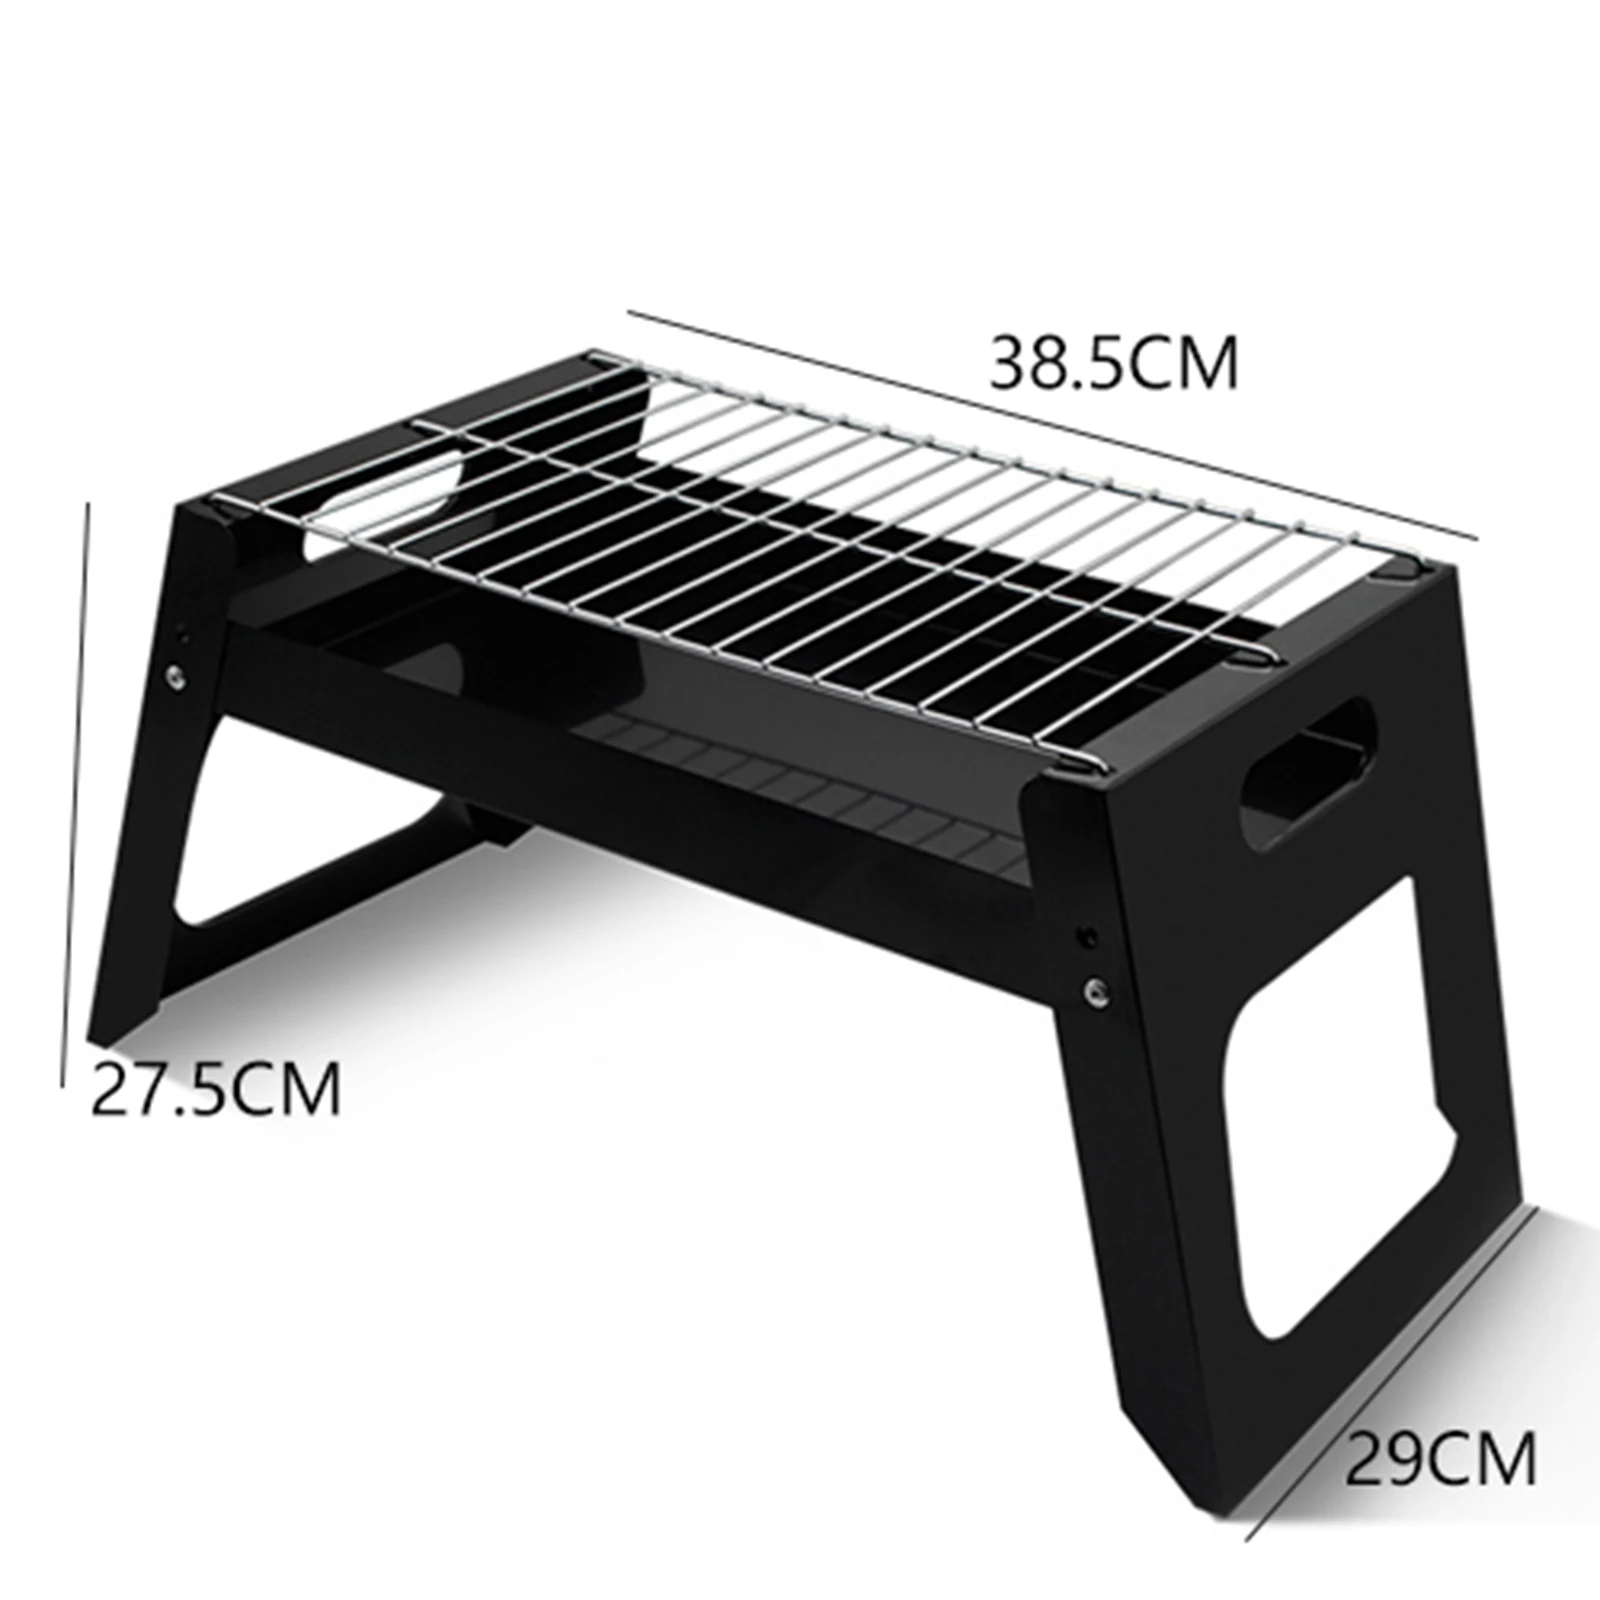 Folding BBQ Grill Portable Compact Charcoal Barbecue BBQ Grill Cooker Bars Smoker Outdoor Camping 27.5x38.5x29 cm 6